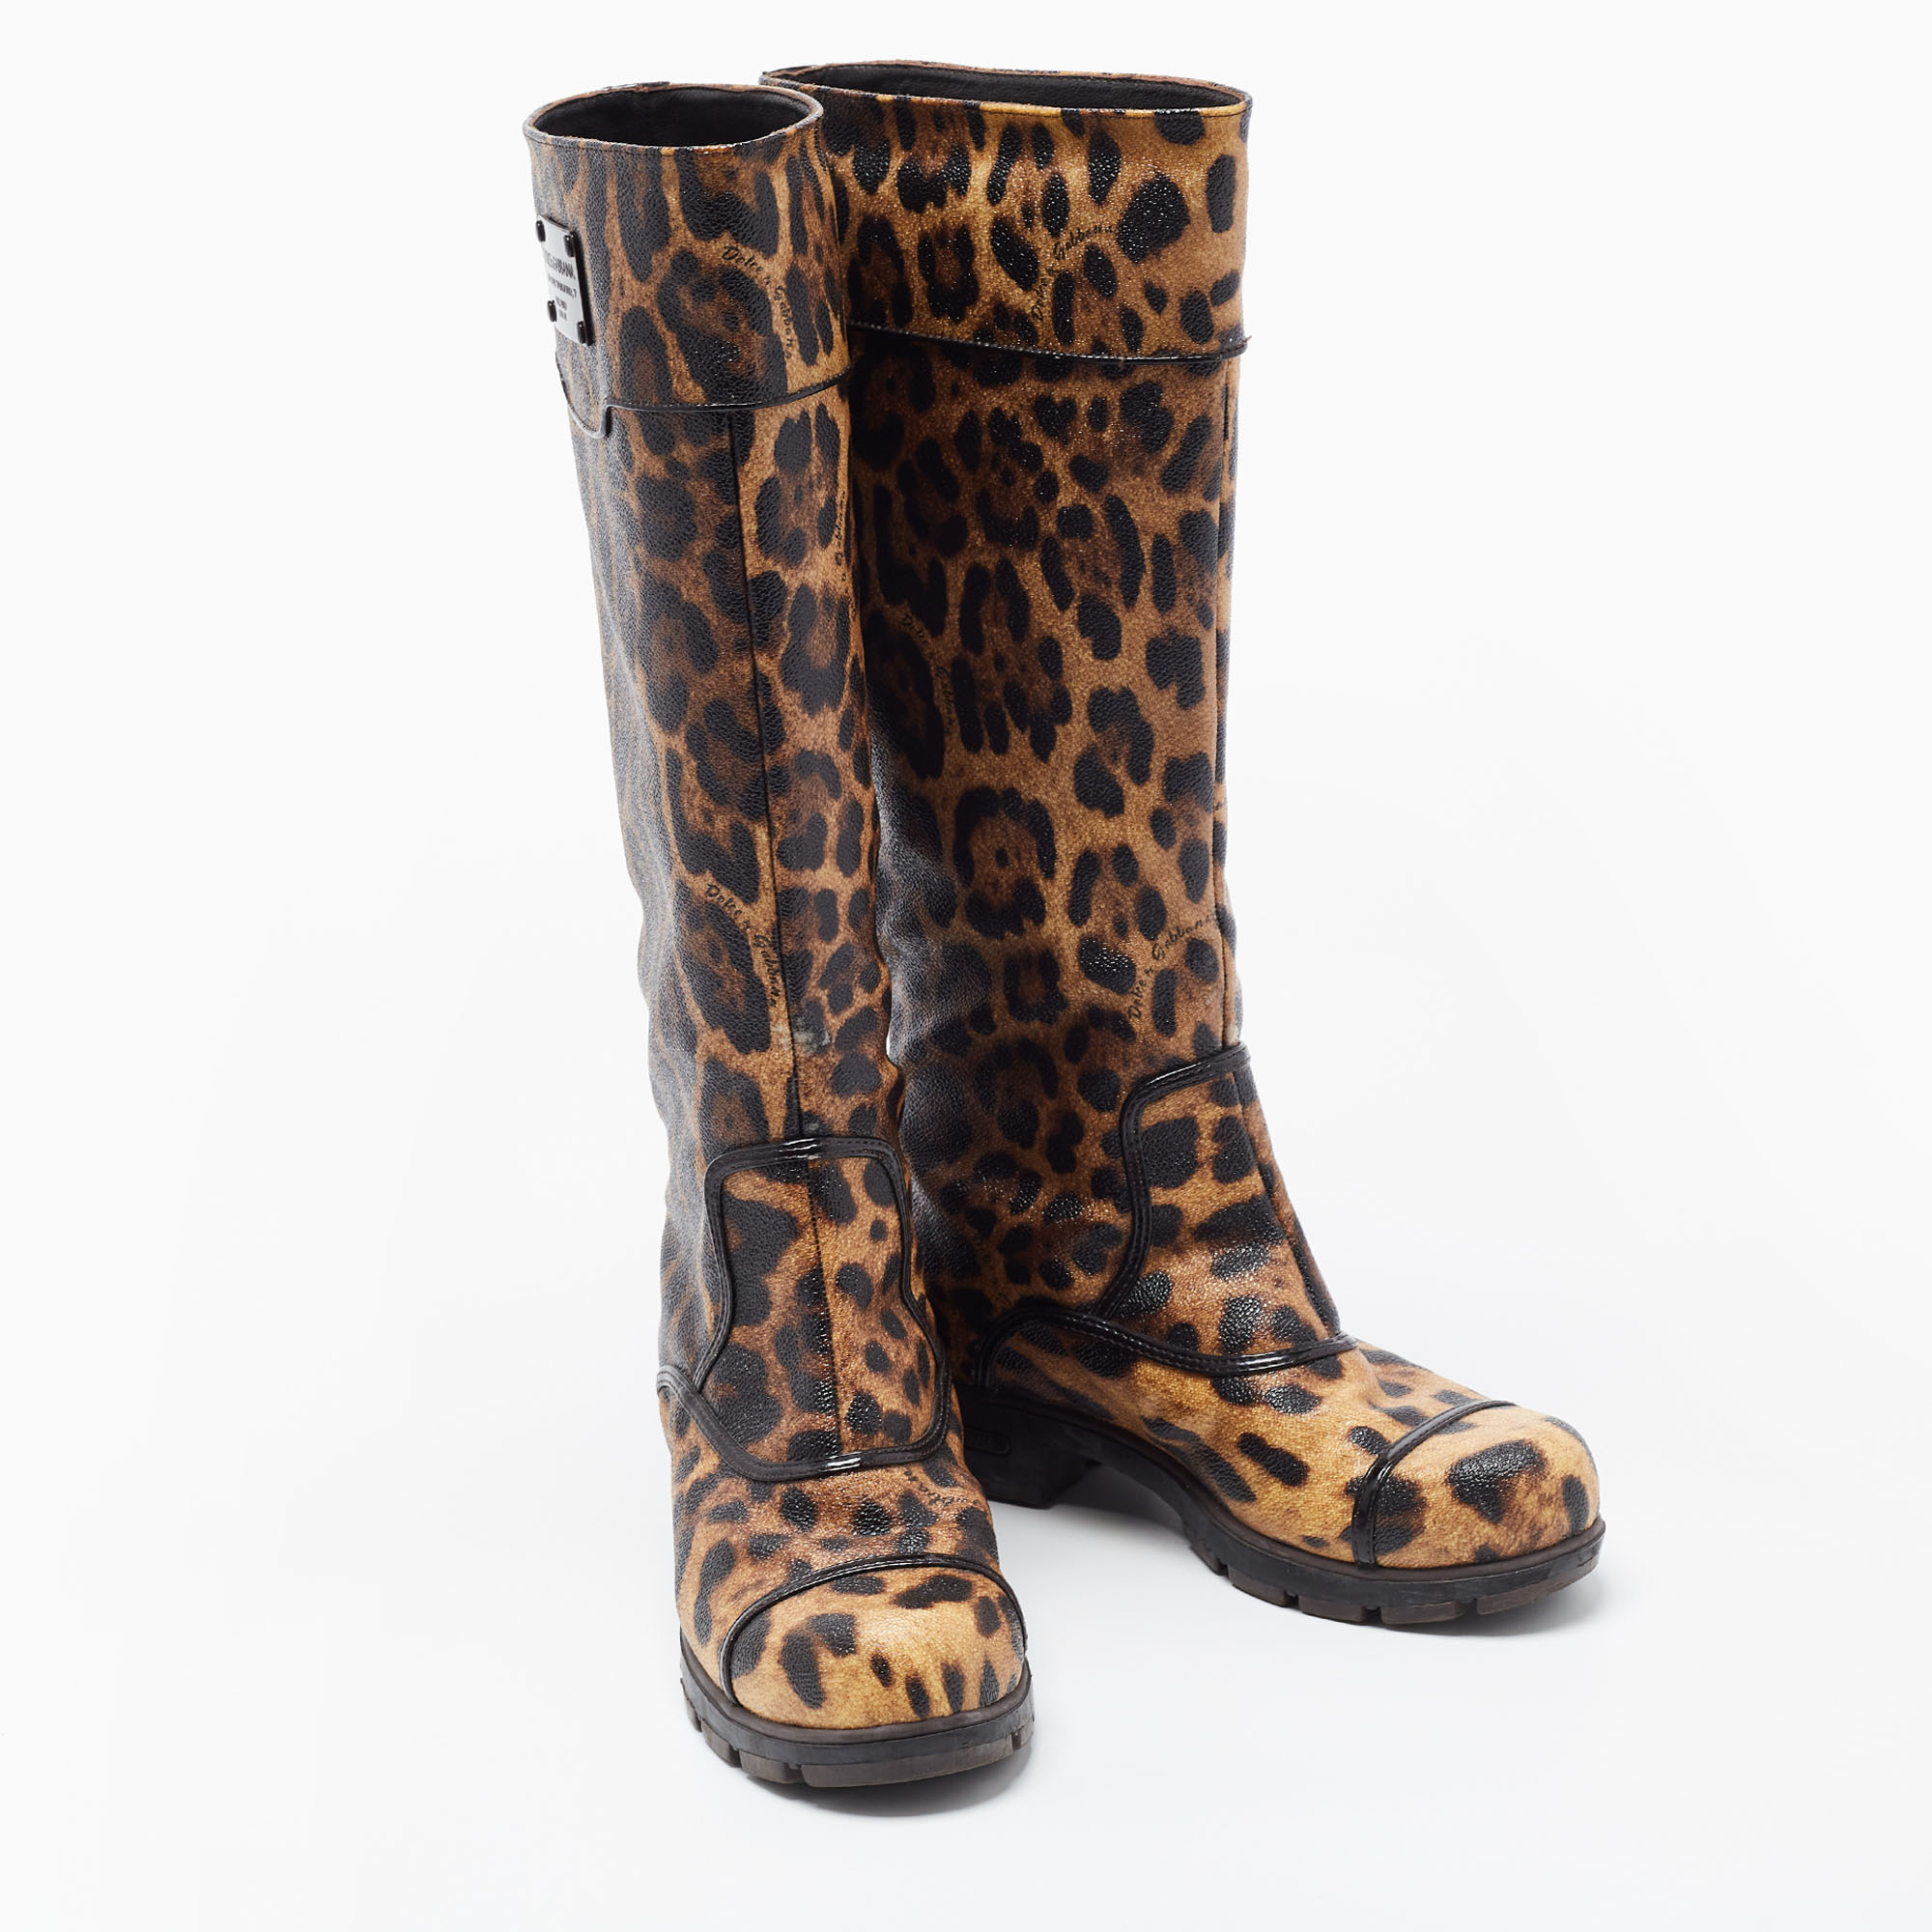 Dolce & Gabbana Brown Coated Canvas Leopard Print Knee Length Boots Size 36